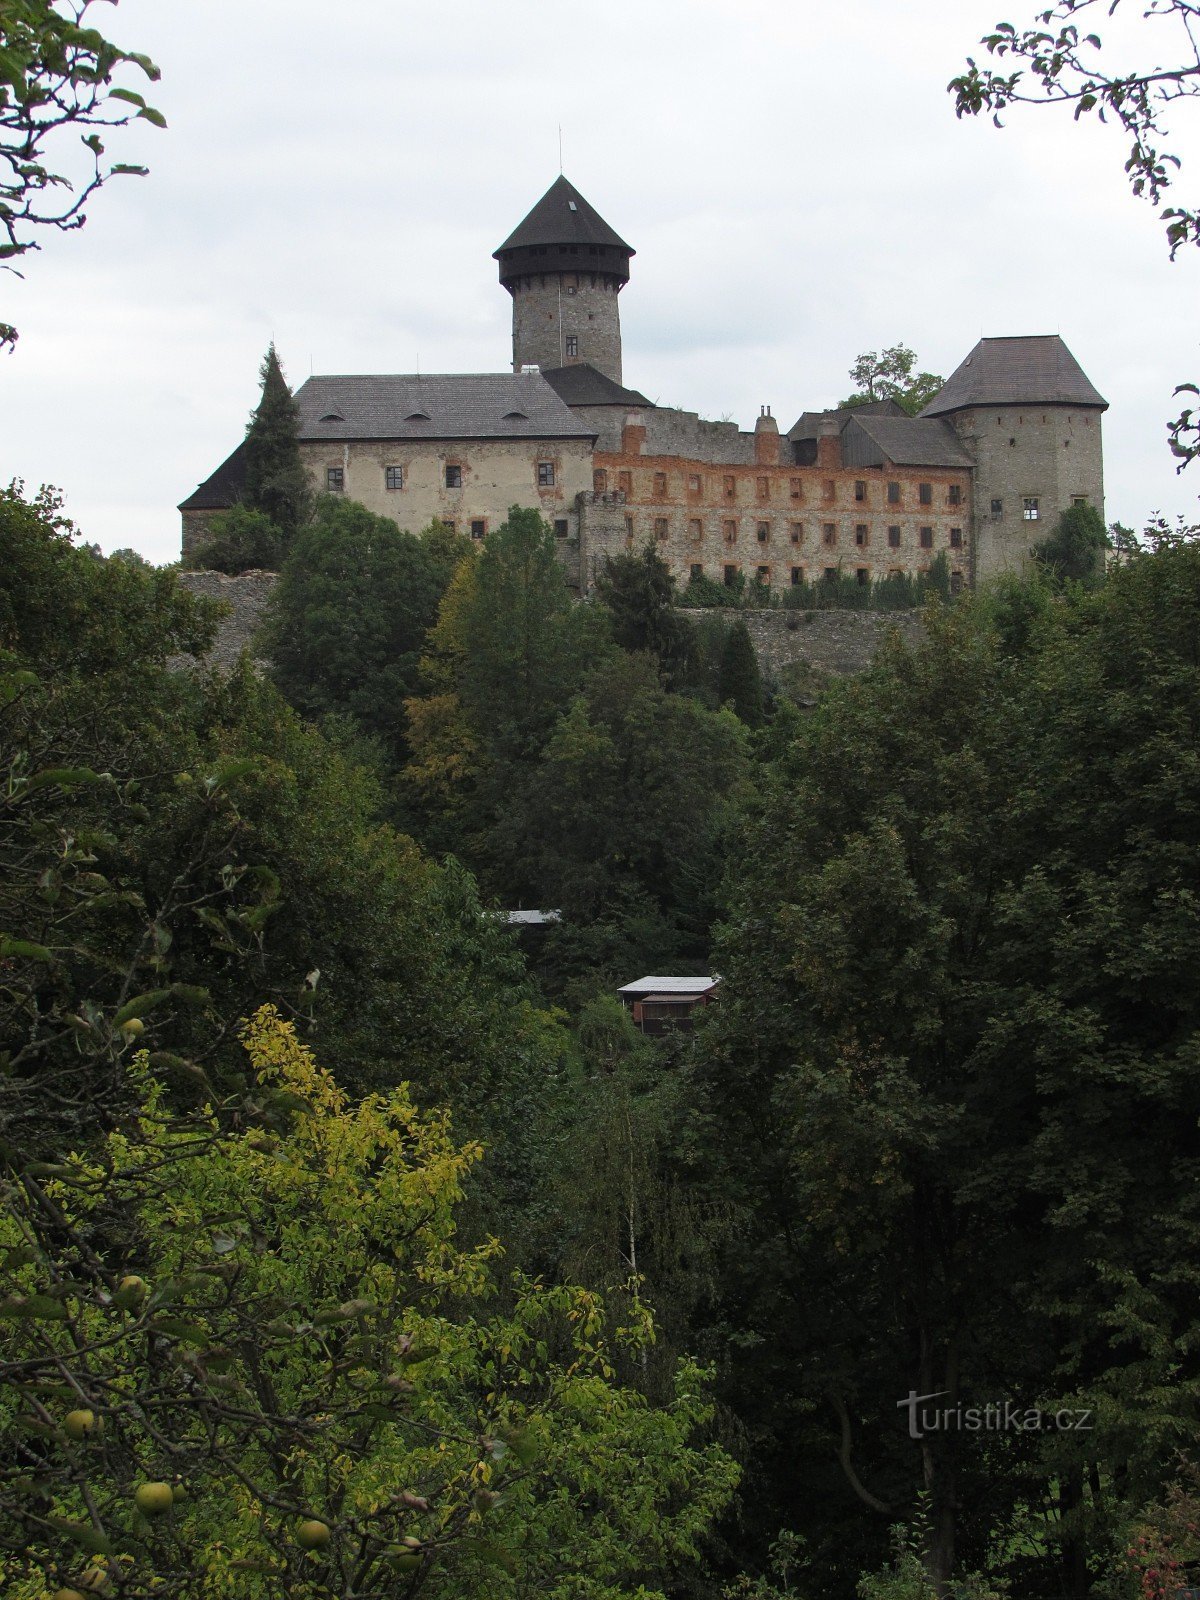 The most beautiful views of Sovinec Castle